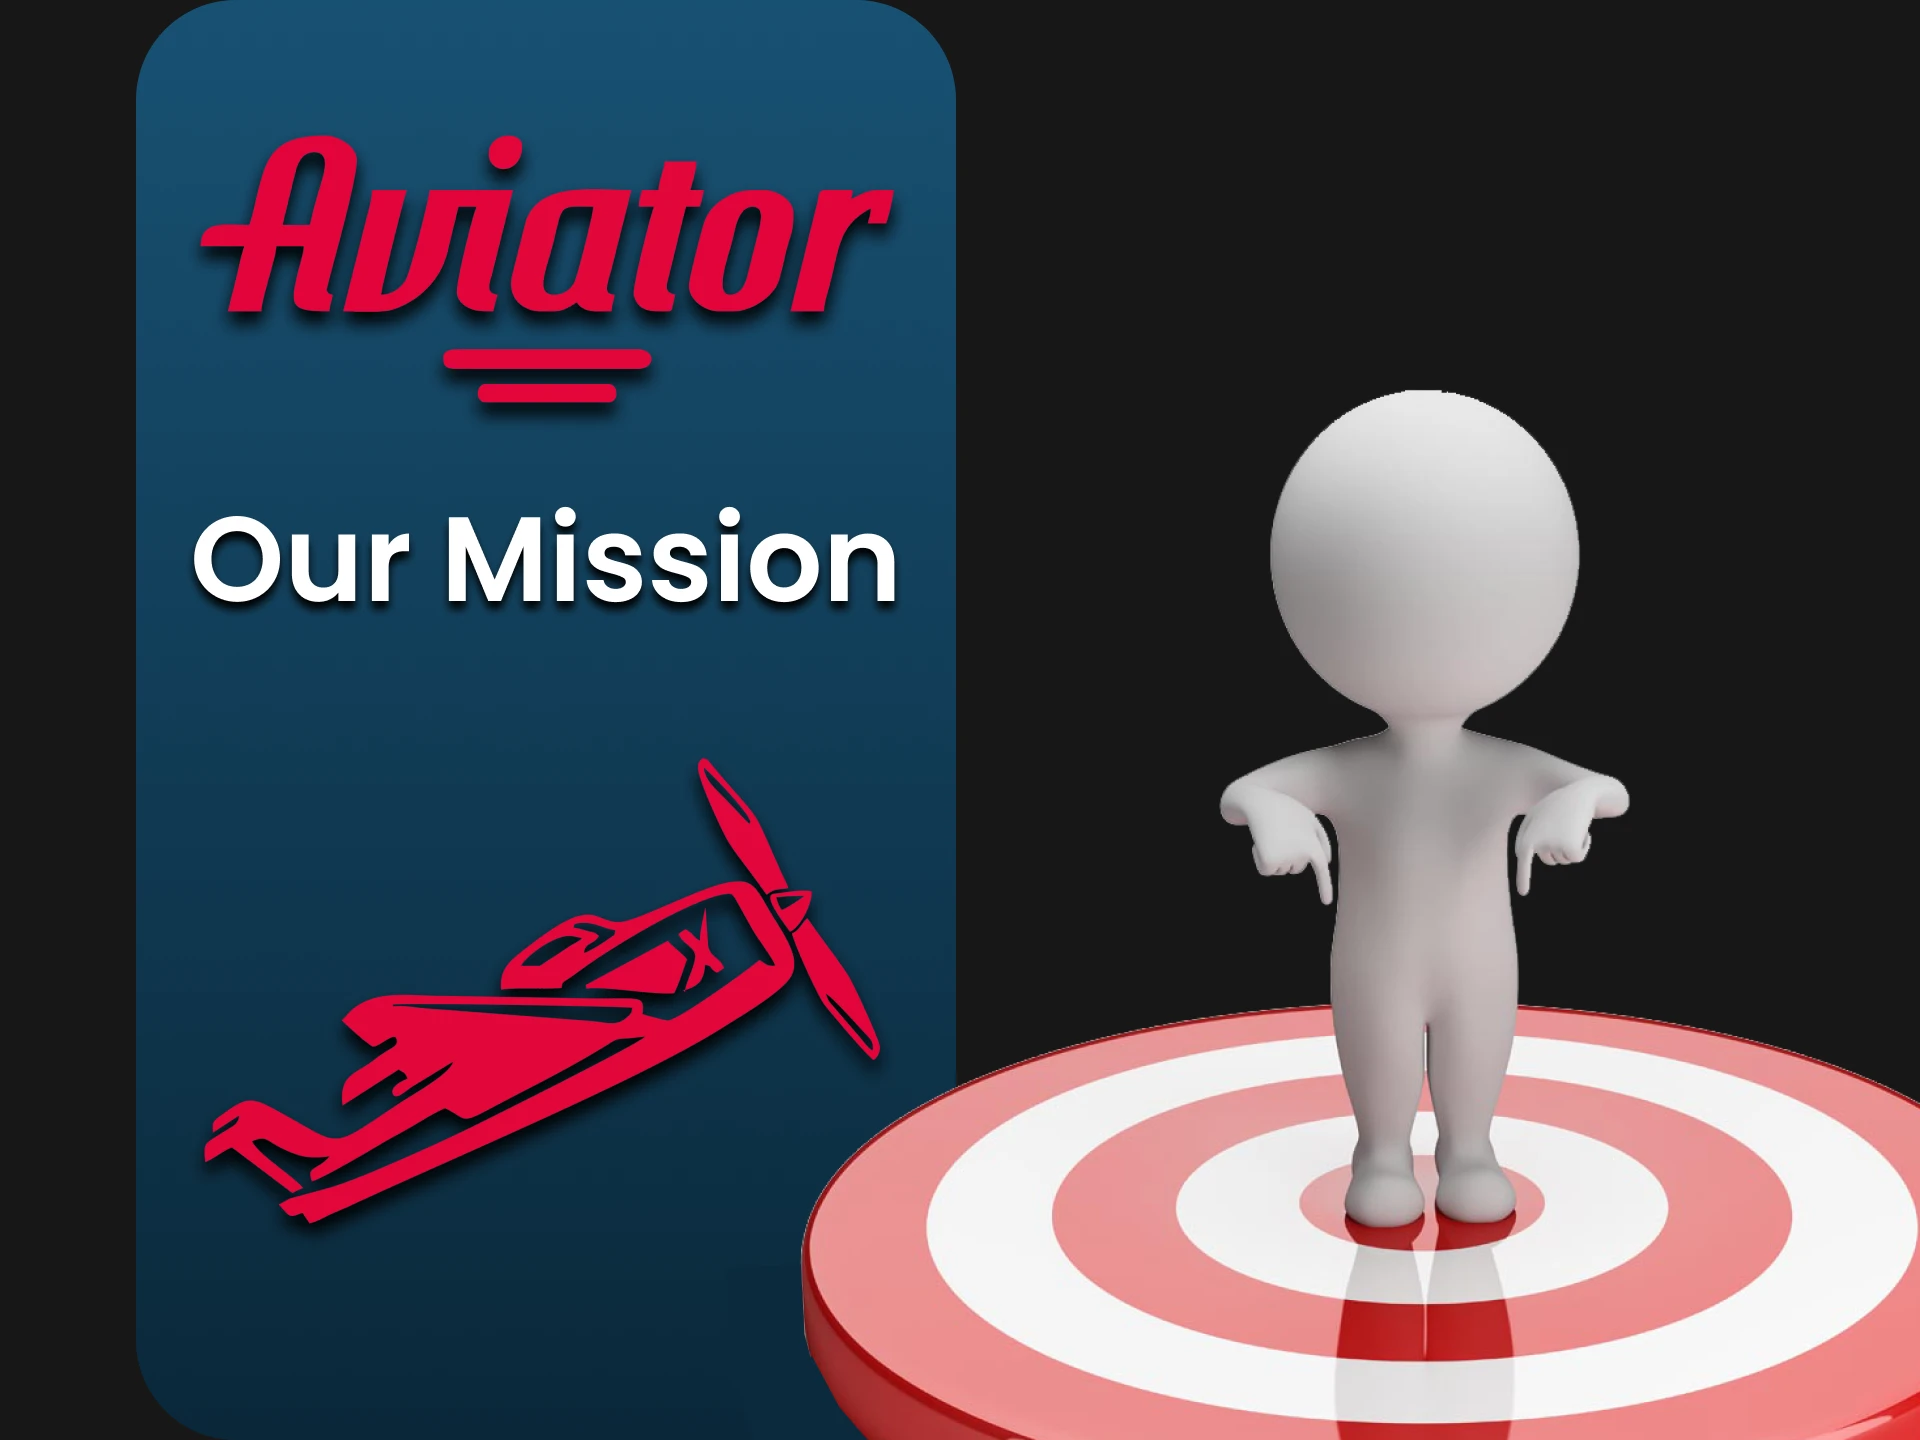 We will tell you what our mission is.